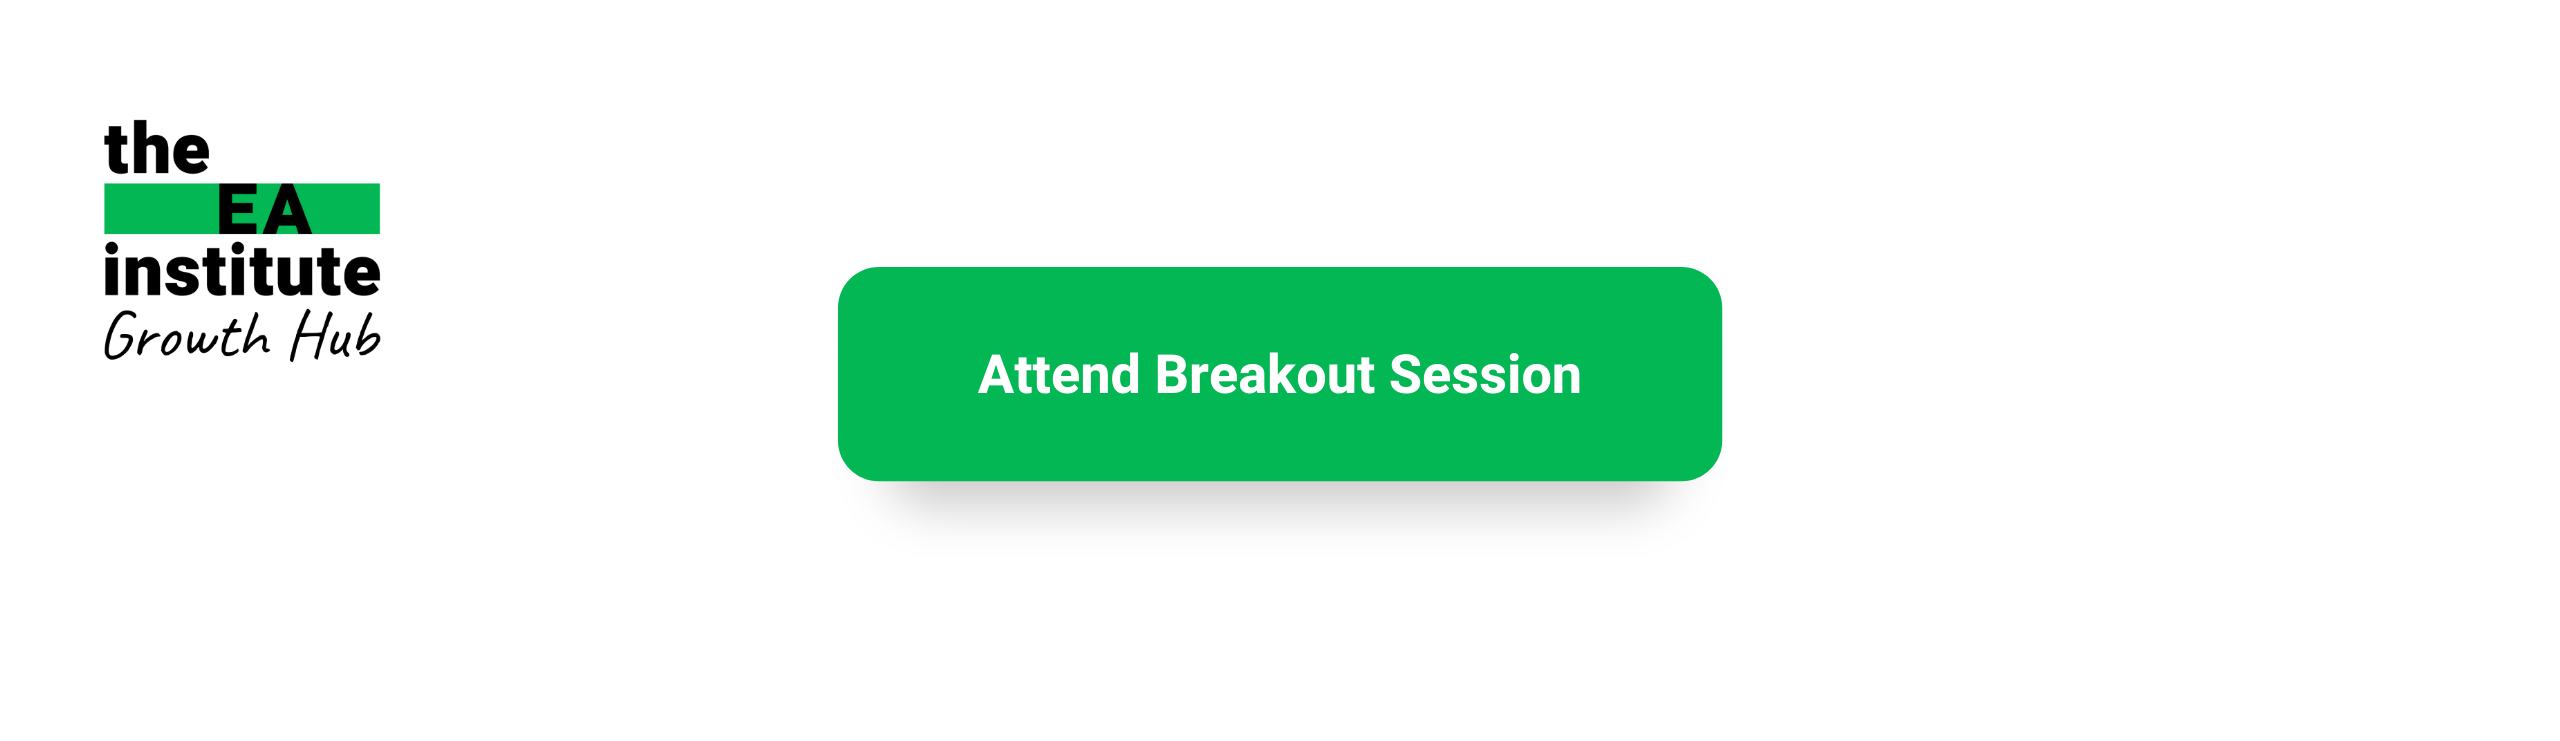 Join the breakout